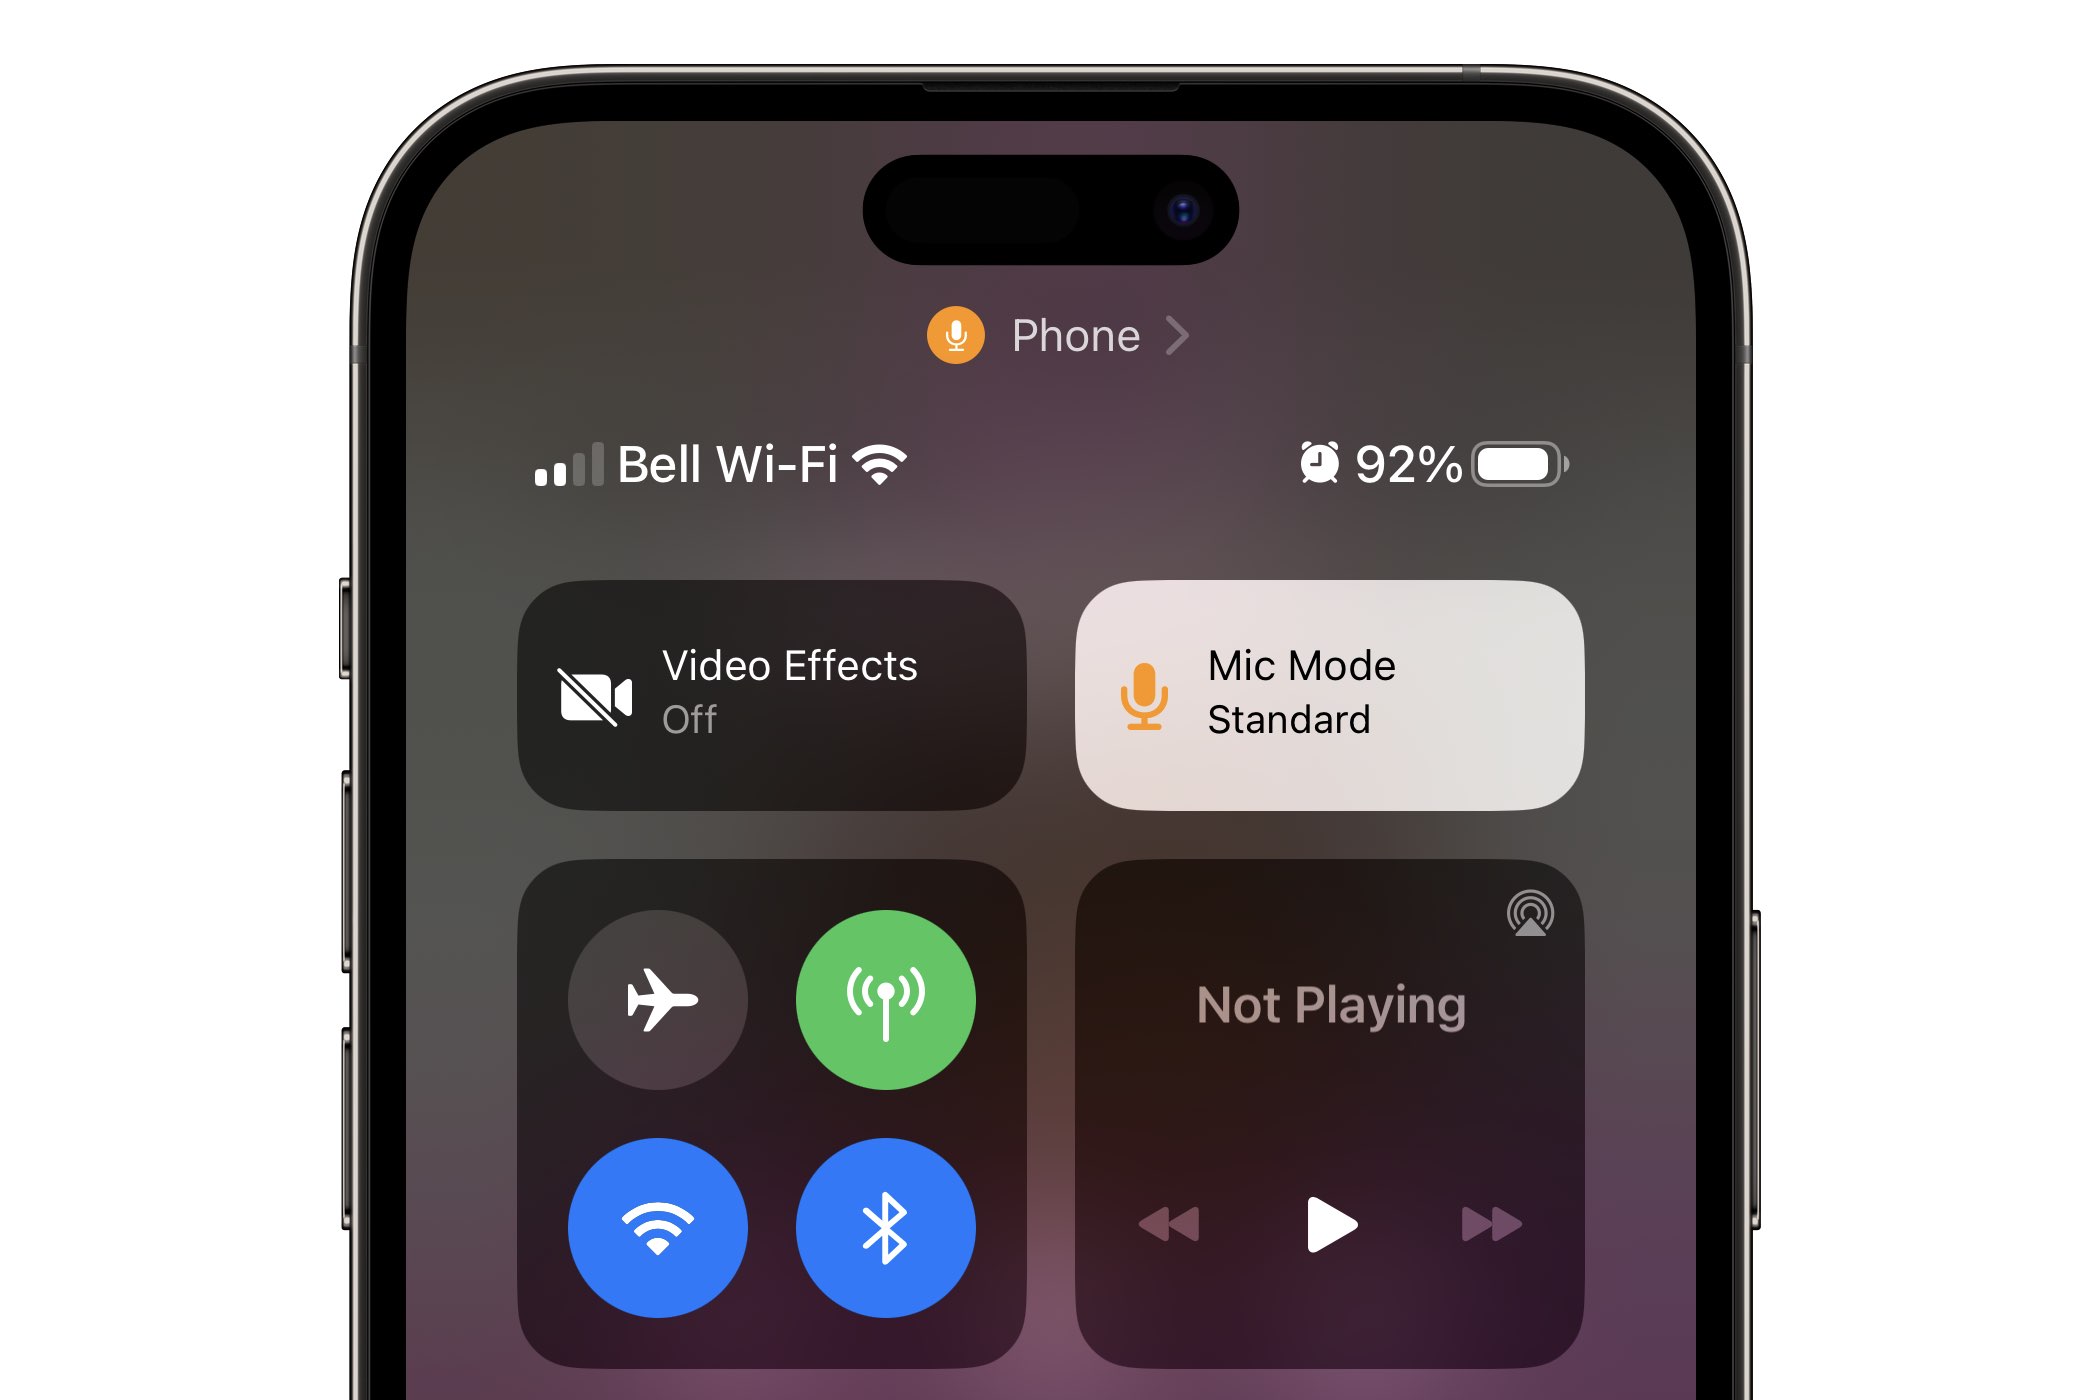 iOS 16.4 Control Center on iPhone showing Standard Mic Mode.